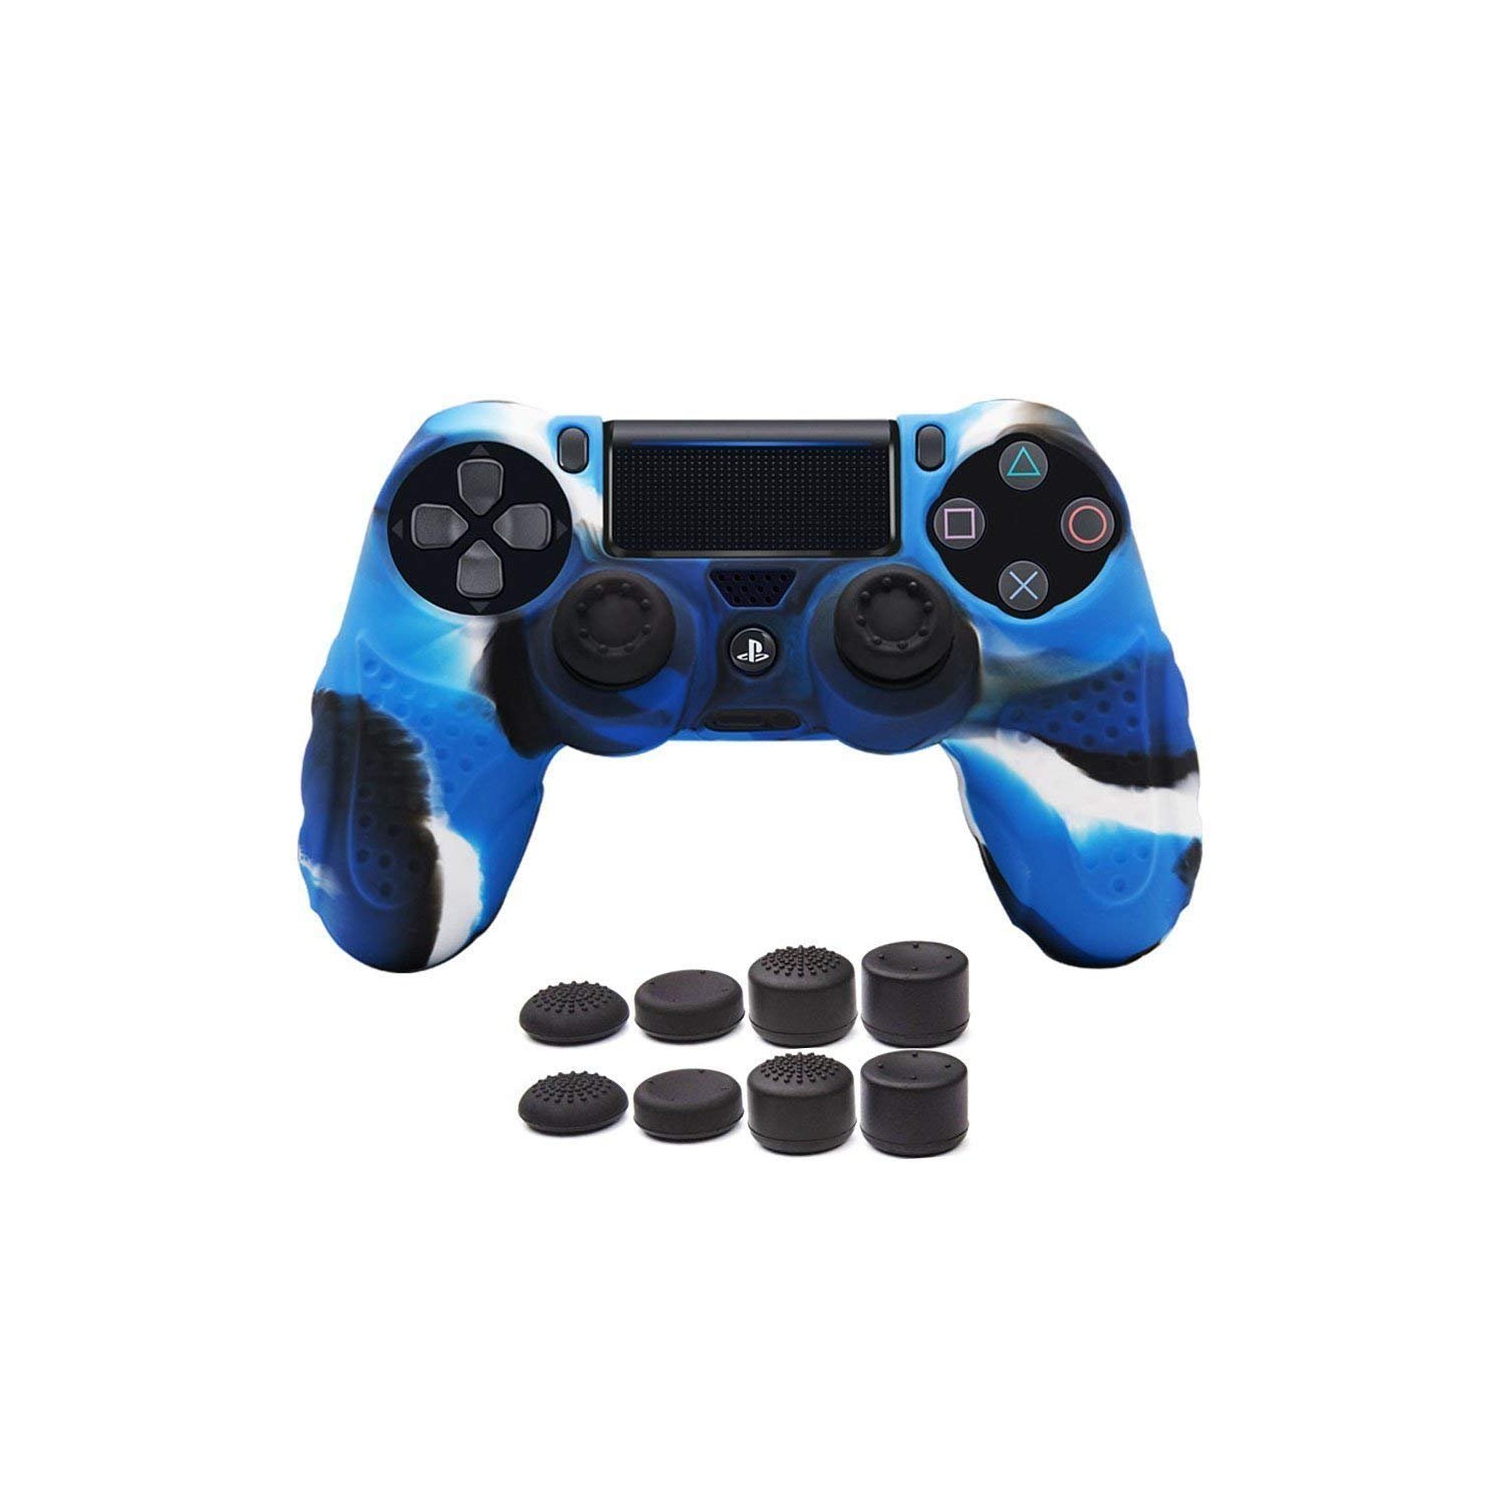 PS4 Controller DualShock 4 Skin Grip Anti-slip Silicone Cover Protector Case for Sony PS4/PS4 Slim/PS4 Pro Controller